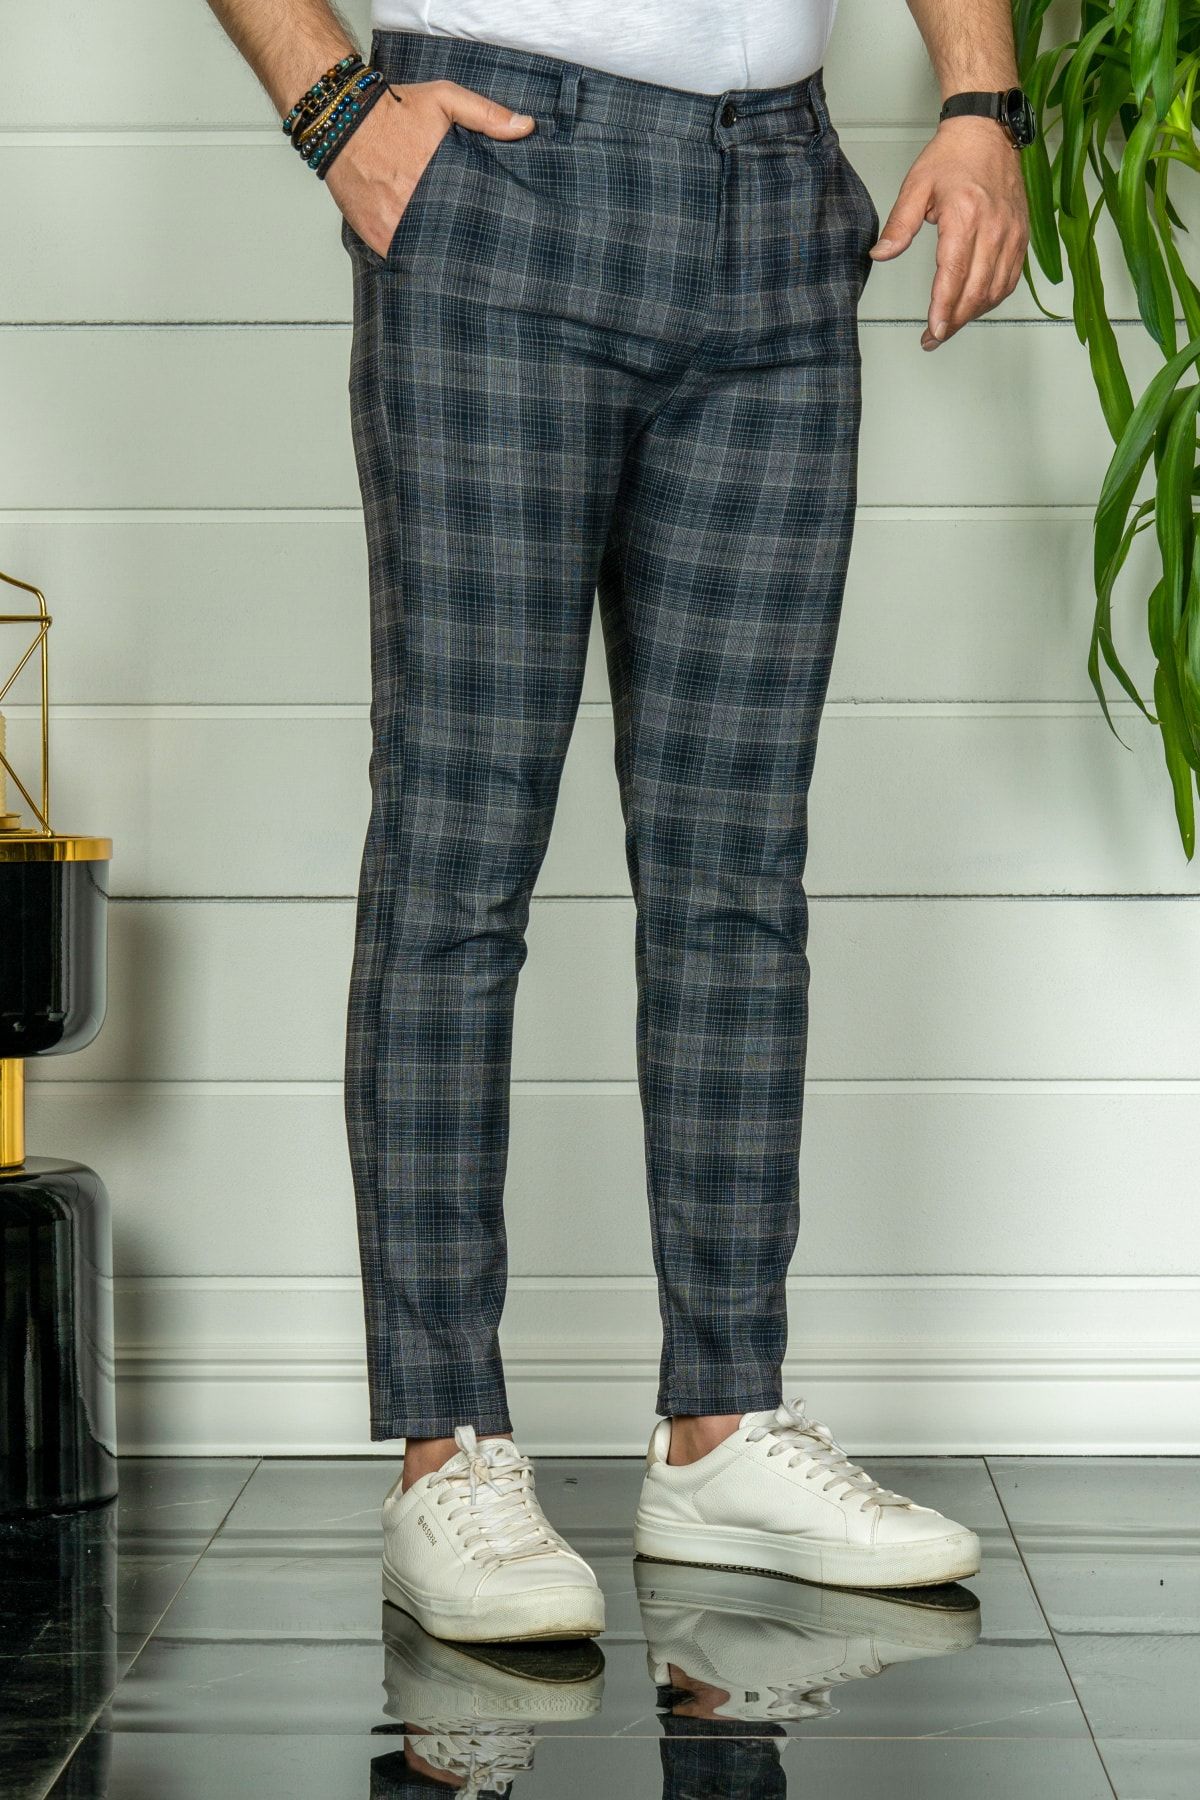 Grey and blue slim fit patterned pants